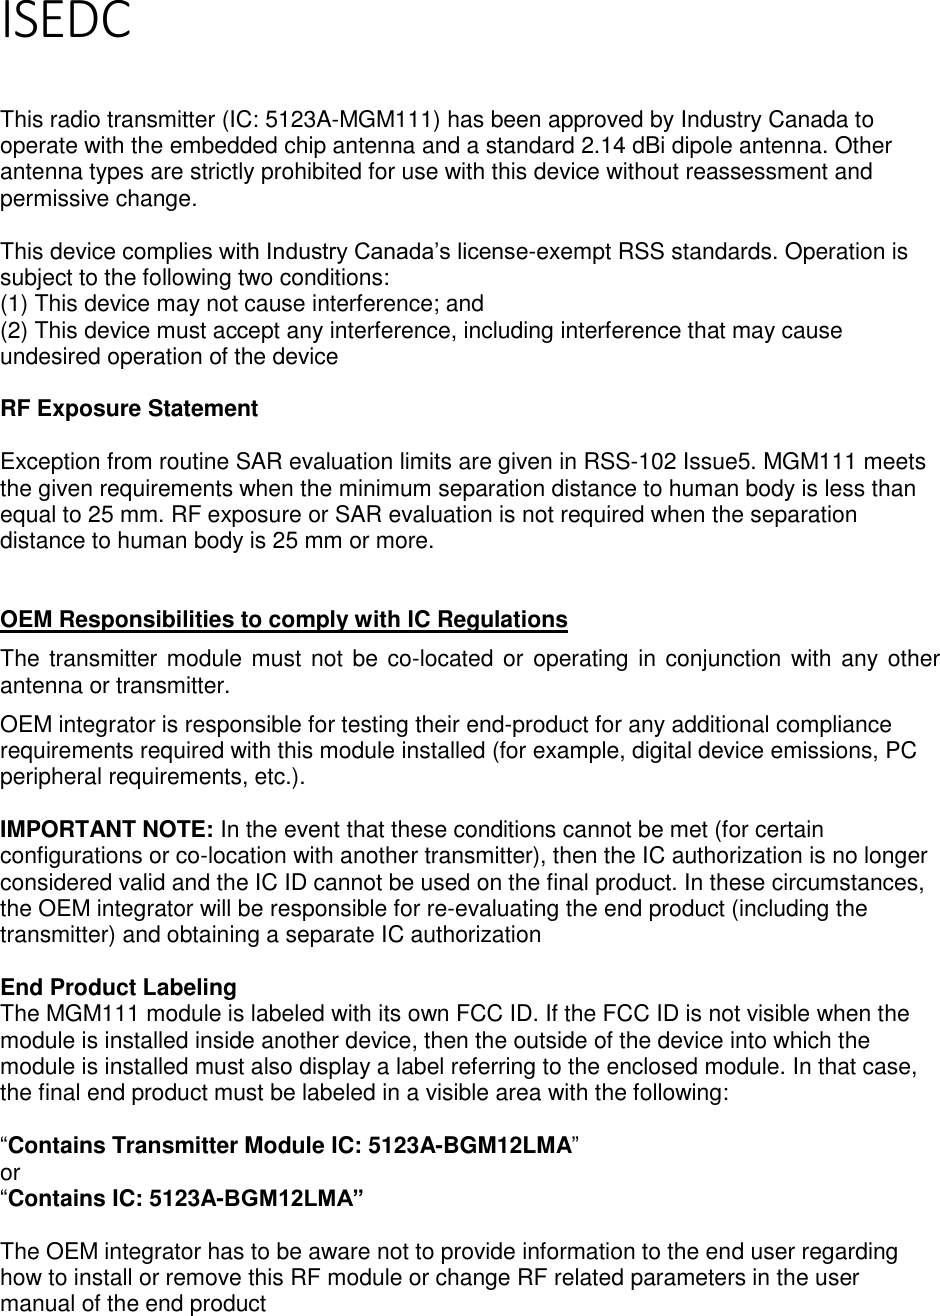 Page 4 of 5 ISEDC   This radio transmitter (IC: 5123A-MGM111) has been approved by Industry Canada to operate with the embedded chip antenna and a standard 2.14 dBi dipole antenna. Other antenna types are strictly prohibited for use with this device without reassessment and permissive change.  This device complies with Industry Canada’s license-exempt RSS standards. Operation is subject to the following two conditions: (1) This device may not cause interference; and (2) This device must accept any interference, including interference that may cause undesired operation of the device  RF Exposure Statement  Exception from routine SAR evaluation limits are given in RSS-102 Issue5. MGM111 meets the given requirements when the minimum separation distance to human body is less than equal to 25 mm. RF exposure or SAR evaluation is not required when the separation distance to human body is 25 mm or more.    OEM Responsibilities to comply with IC Regulations The transmitter module must not be co-located or operating in conjunction with any other antenna or transmitter.  OEM integrator is responsible for testing their end-product for any additional compliance requirements required with this module installed (for example, digital device emissions, PC peripheral requirements, etc.).   IMPORTANT NOTE: In the event that these conditions cannot be met (for certain configurations or co-location with another transmitter), then the IC authorization is no longer considered valid and the IC ID cannot be used on the final product. In these circumstances, the OEM integrator will be responsible for re-evaluating the end product (including the transmitter) and obtaining a separate IC authorization  End Product Labeling The MGM111 module is labeled with its own FCC ID. If the FCC ID is not visible when the module is installed inside another device, then the outside of the device into which the module is installed must also display a label referring to the enclosed module. In that case, the final end product must be labeled in a visible area with the following:   “Contains Transmitter Module IC: 5123A-BGM12LMA” or  “Contains IC: 5123A-BGM12LMA”  The OEM integrator has to be aware not to provide information to the end user regarding how to install or remove this RF module or change RF related parameters in the user manual of the end product    